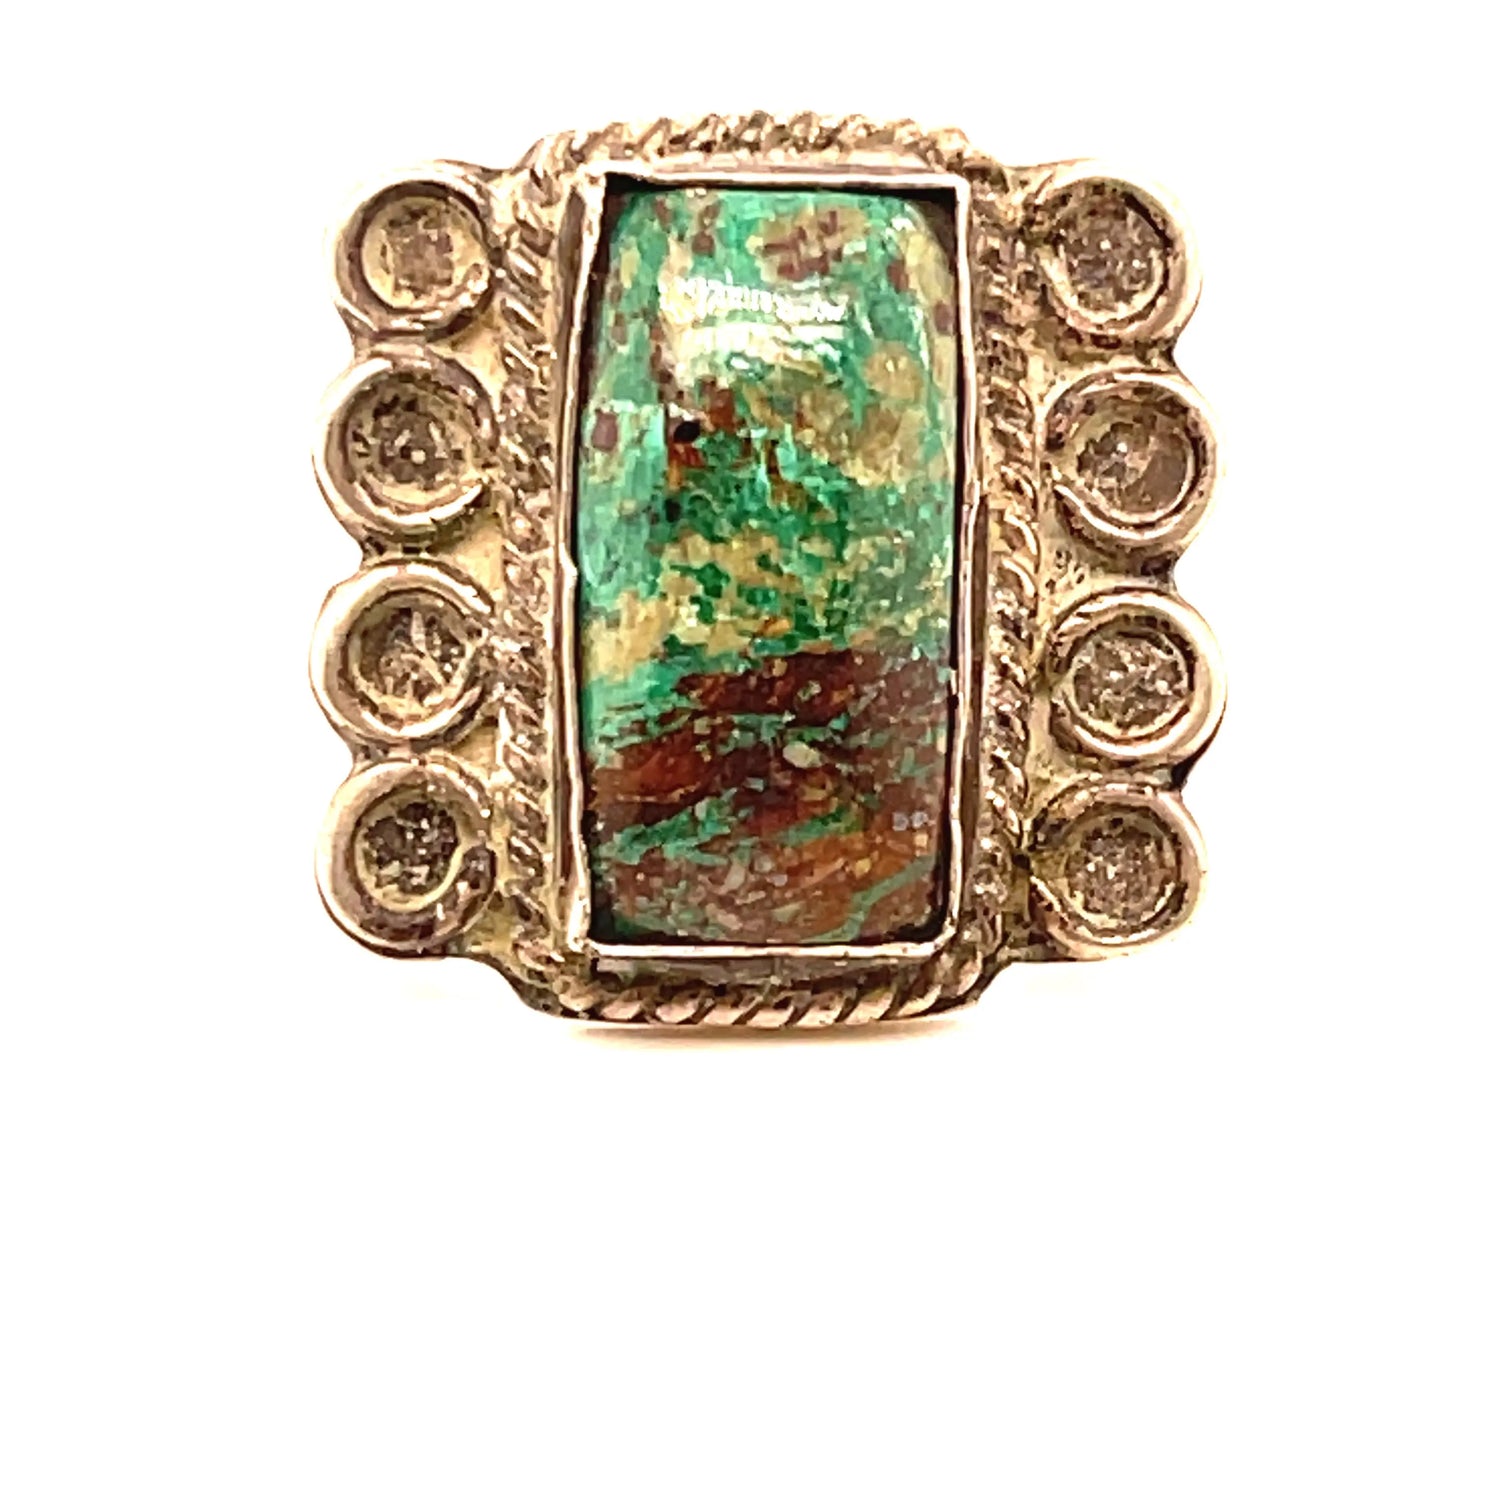 1930s Vintage Turquoise Ring - Squash Blossom Vail